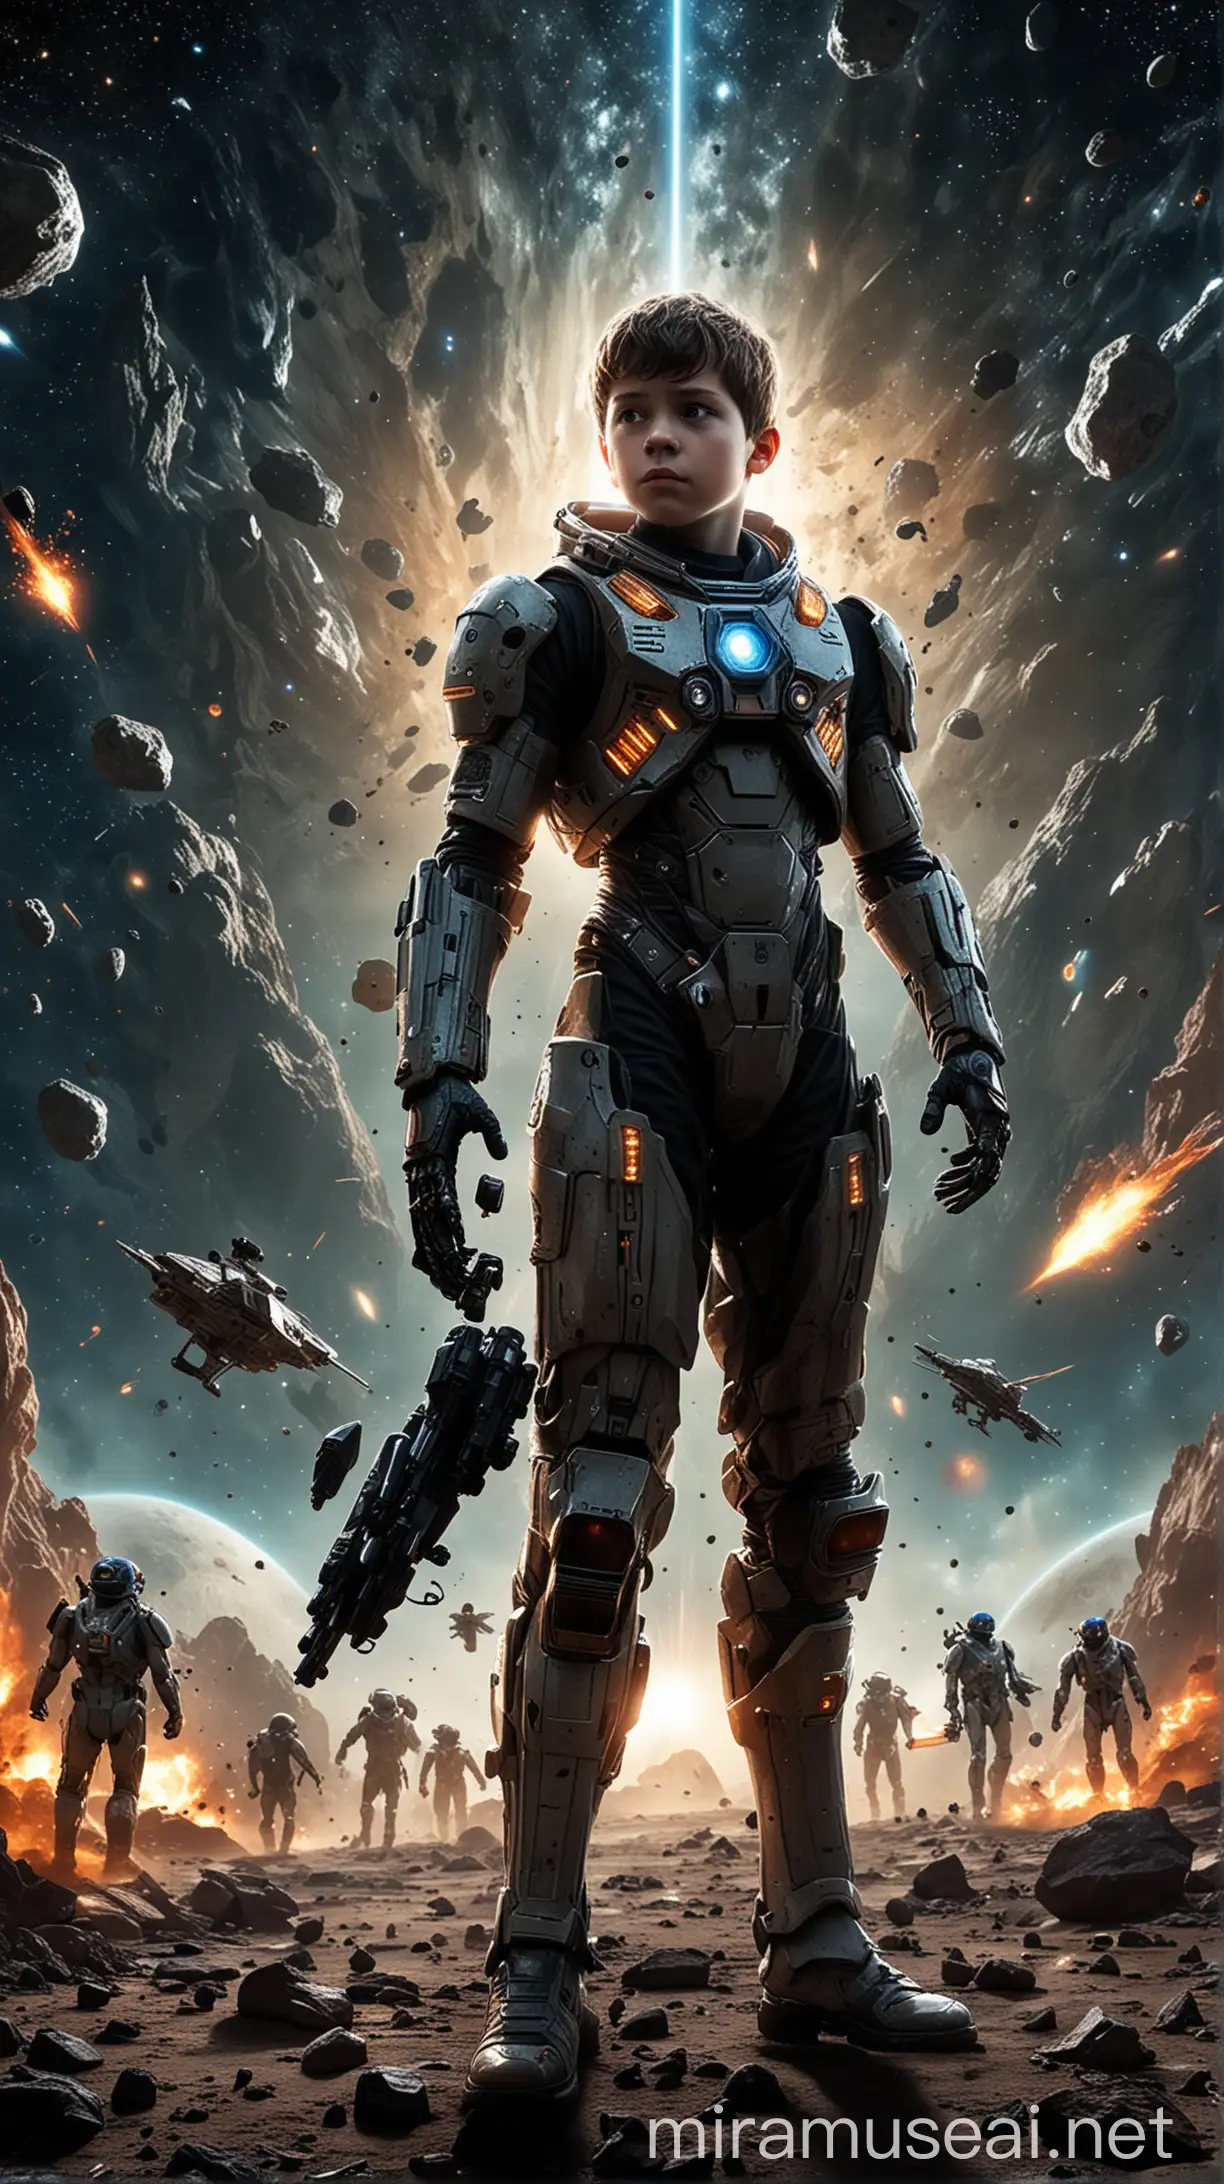 Craft an intense scene where a courageous young boy battles extraterrestrial invaders in the vastness of cosmic space. Armed with an asteroid gun, he dodges through asteroid fields, his spacesuit shimmering under distant starlight. The alien ships swoop in, firing energy beams, while our hero retaliates with precise shots. Explosions bloom against the galactic backdrop as he fights to protect our universe. Capture the adrenaline, the danger, and the cosmic majesty.